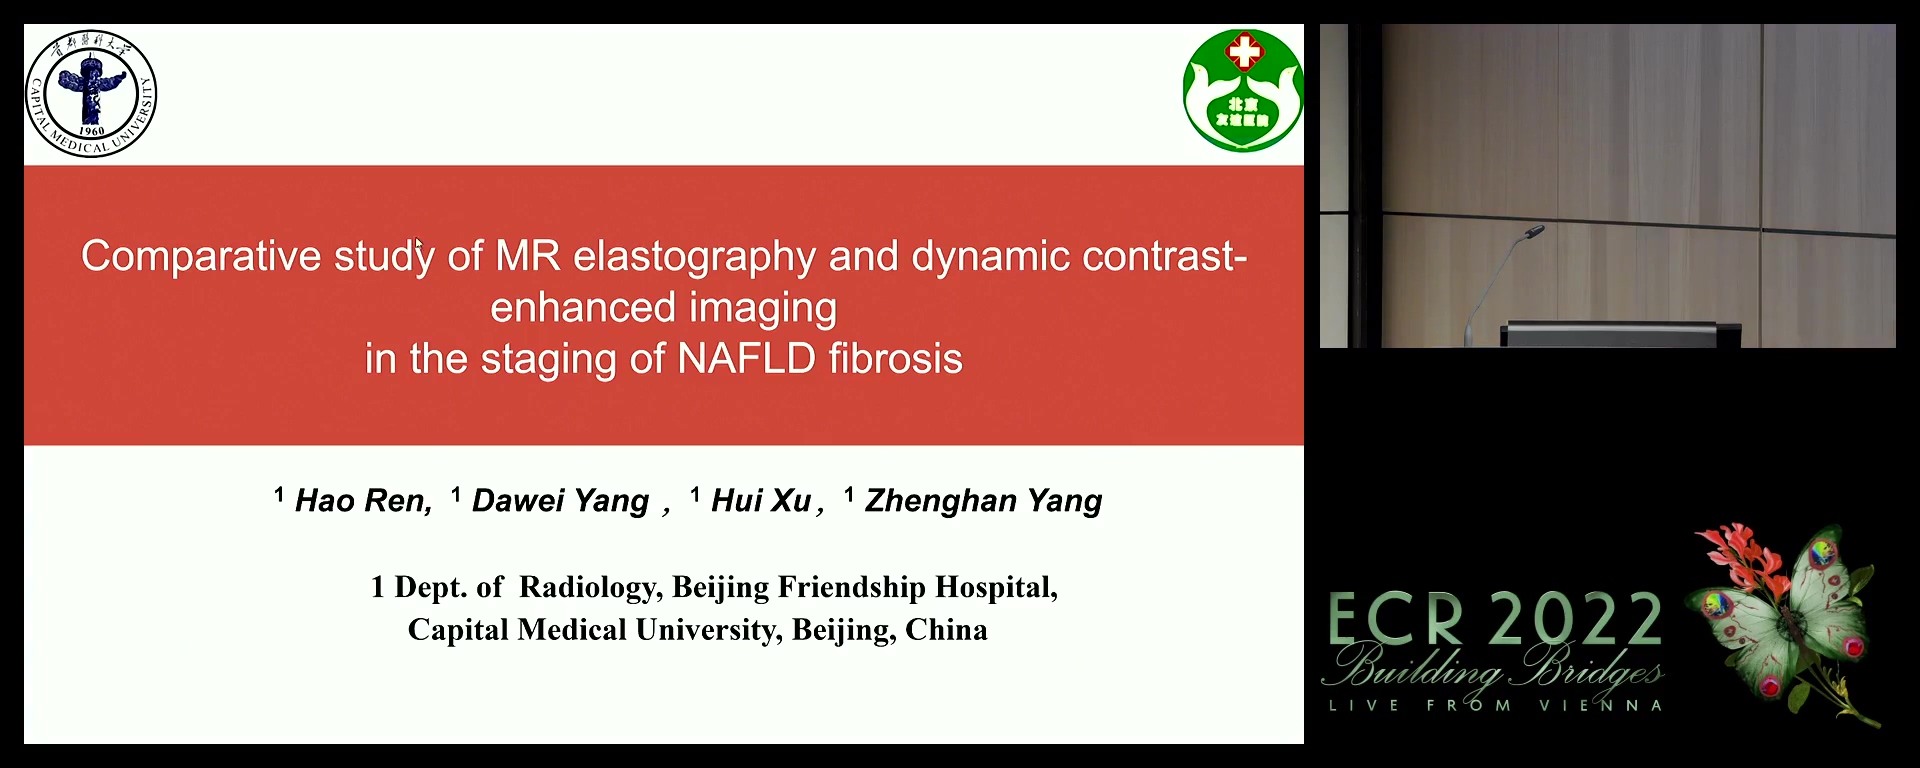 Comparative study of MR elastography and dynamic contrast-enhanced imaging in the staging of NAFLD fibrosis